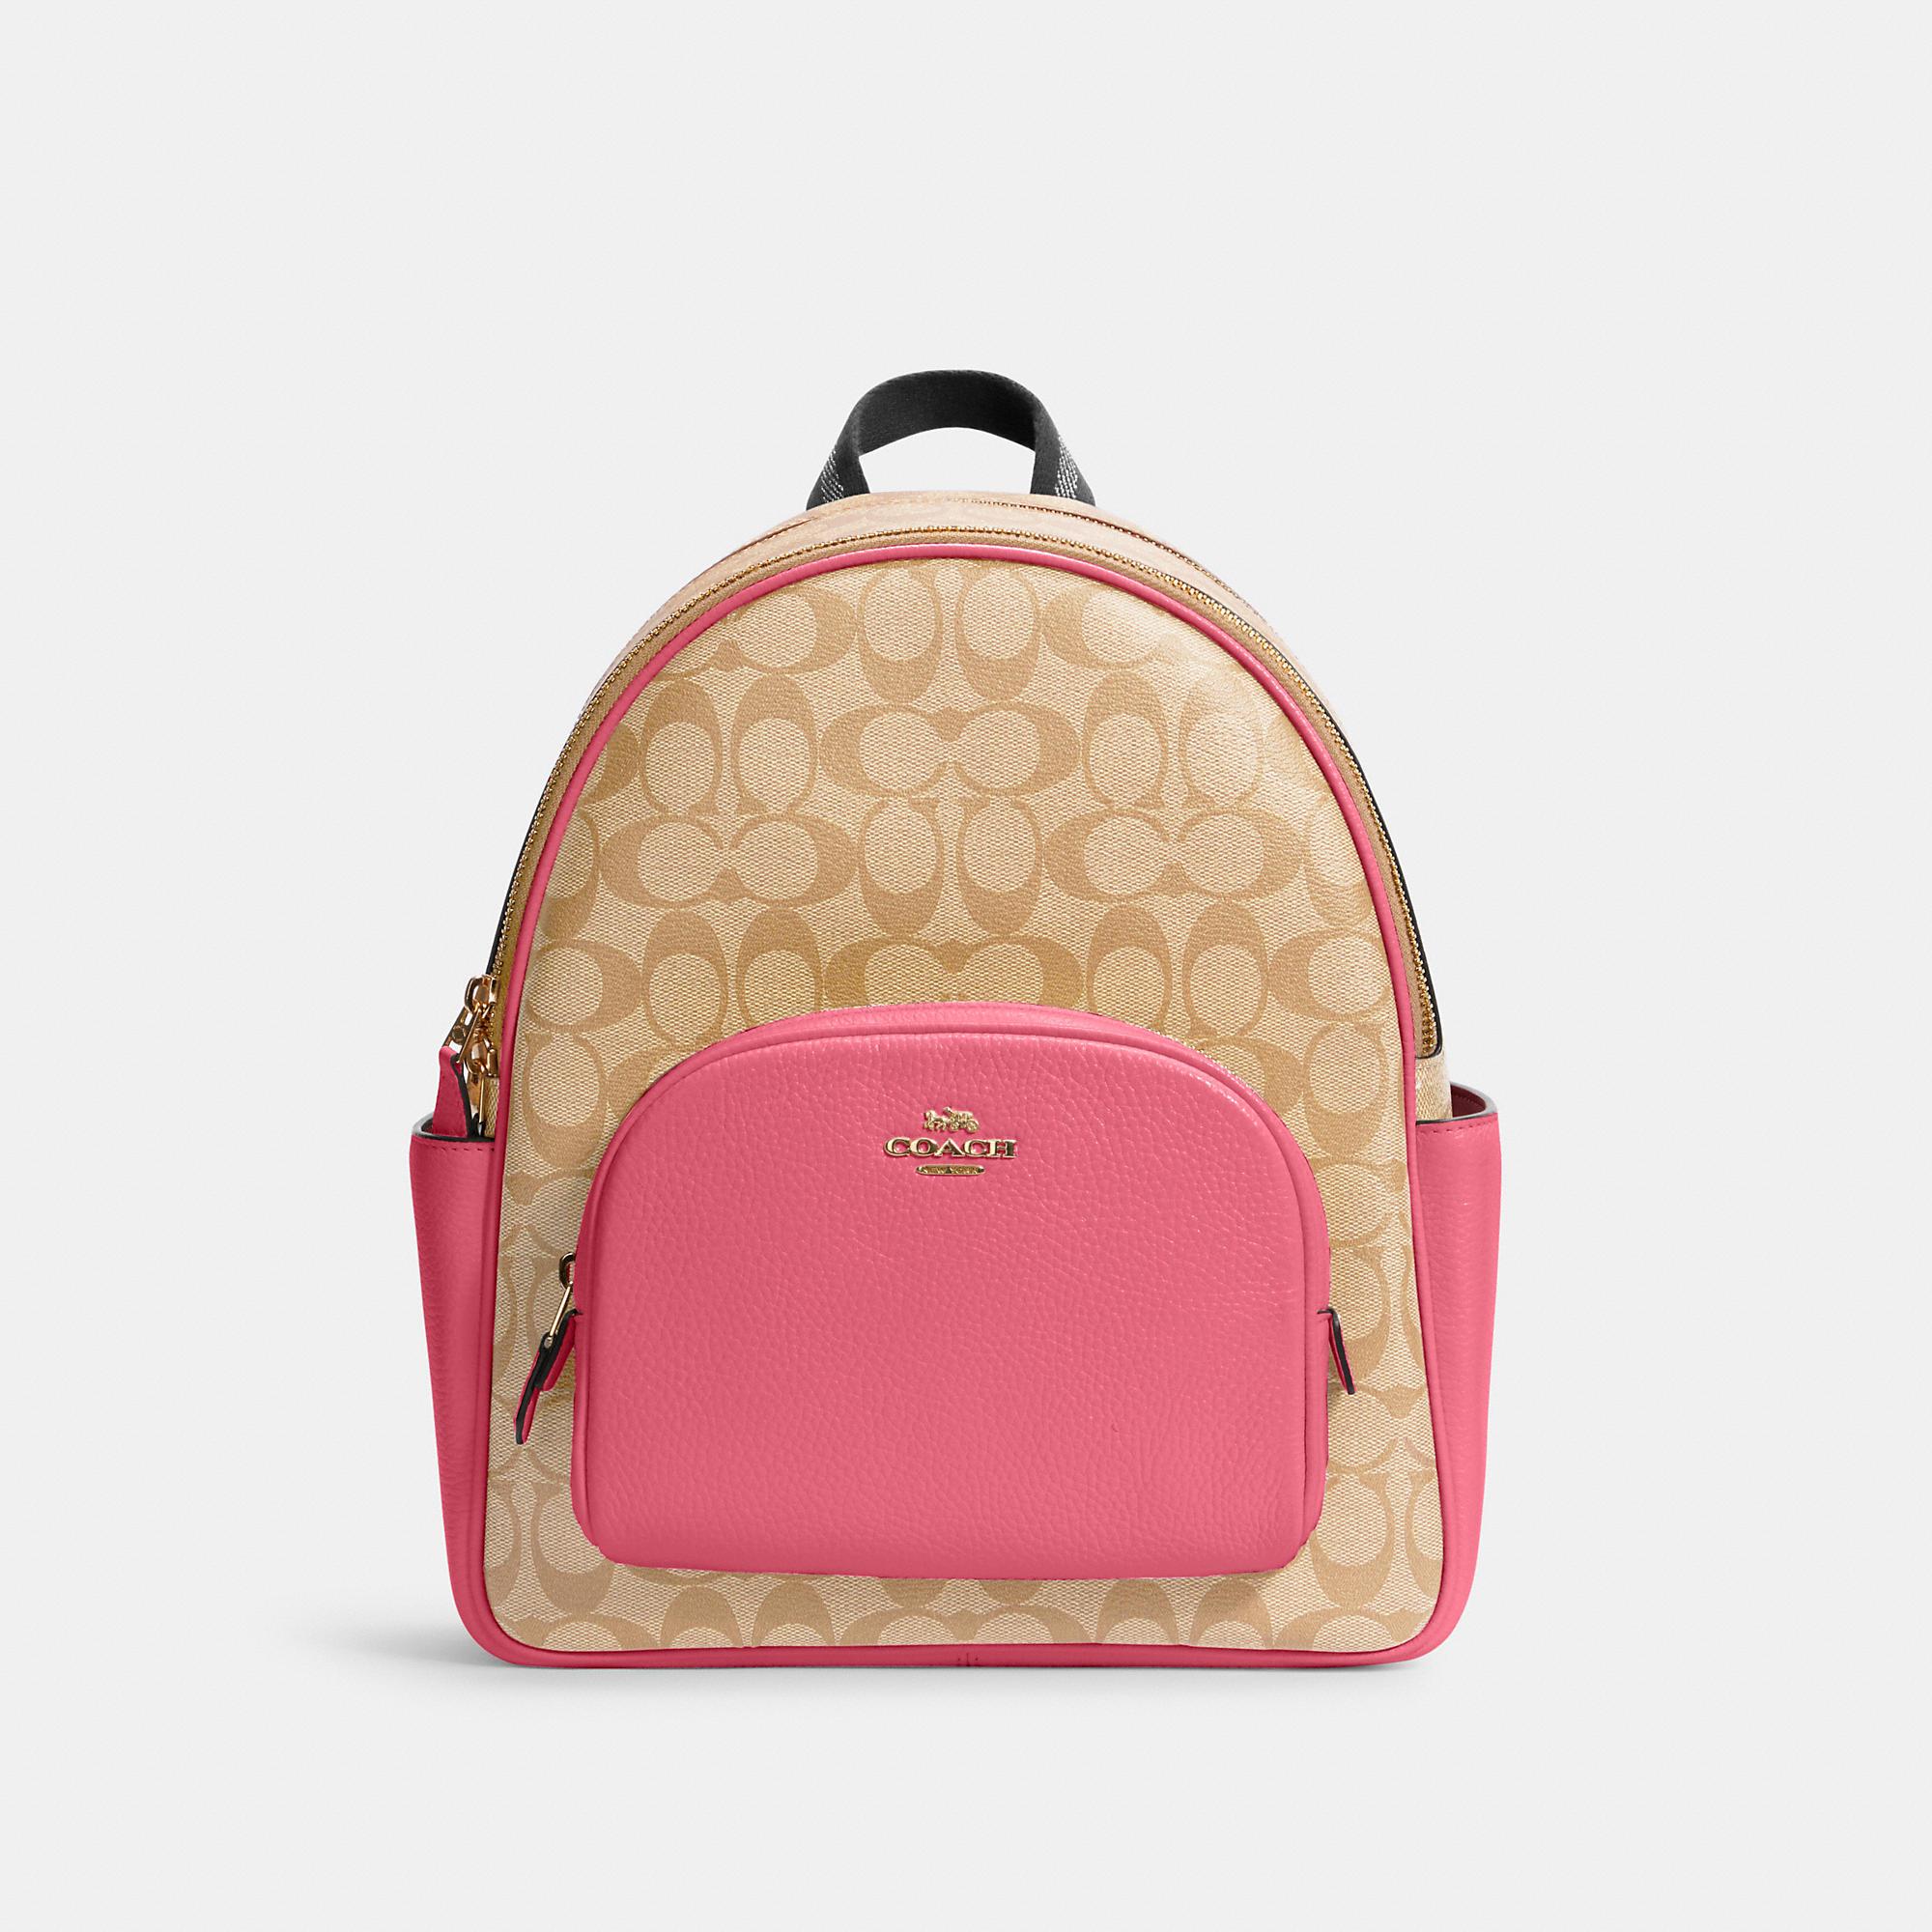 Coach Court Backpack In Signature Canvas ugel01ep.gob.pe